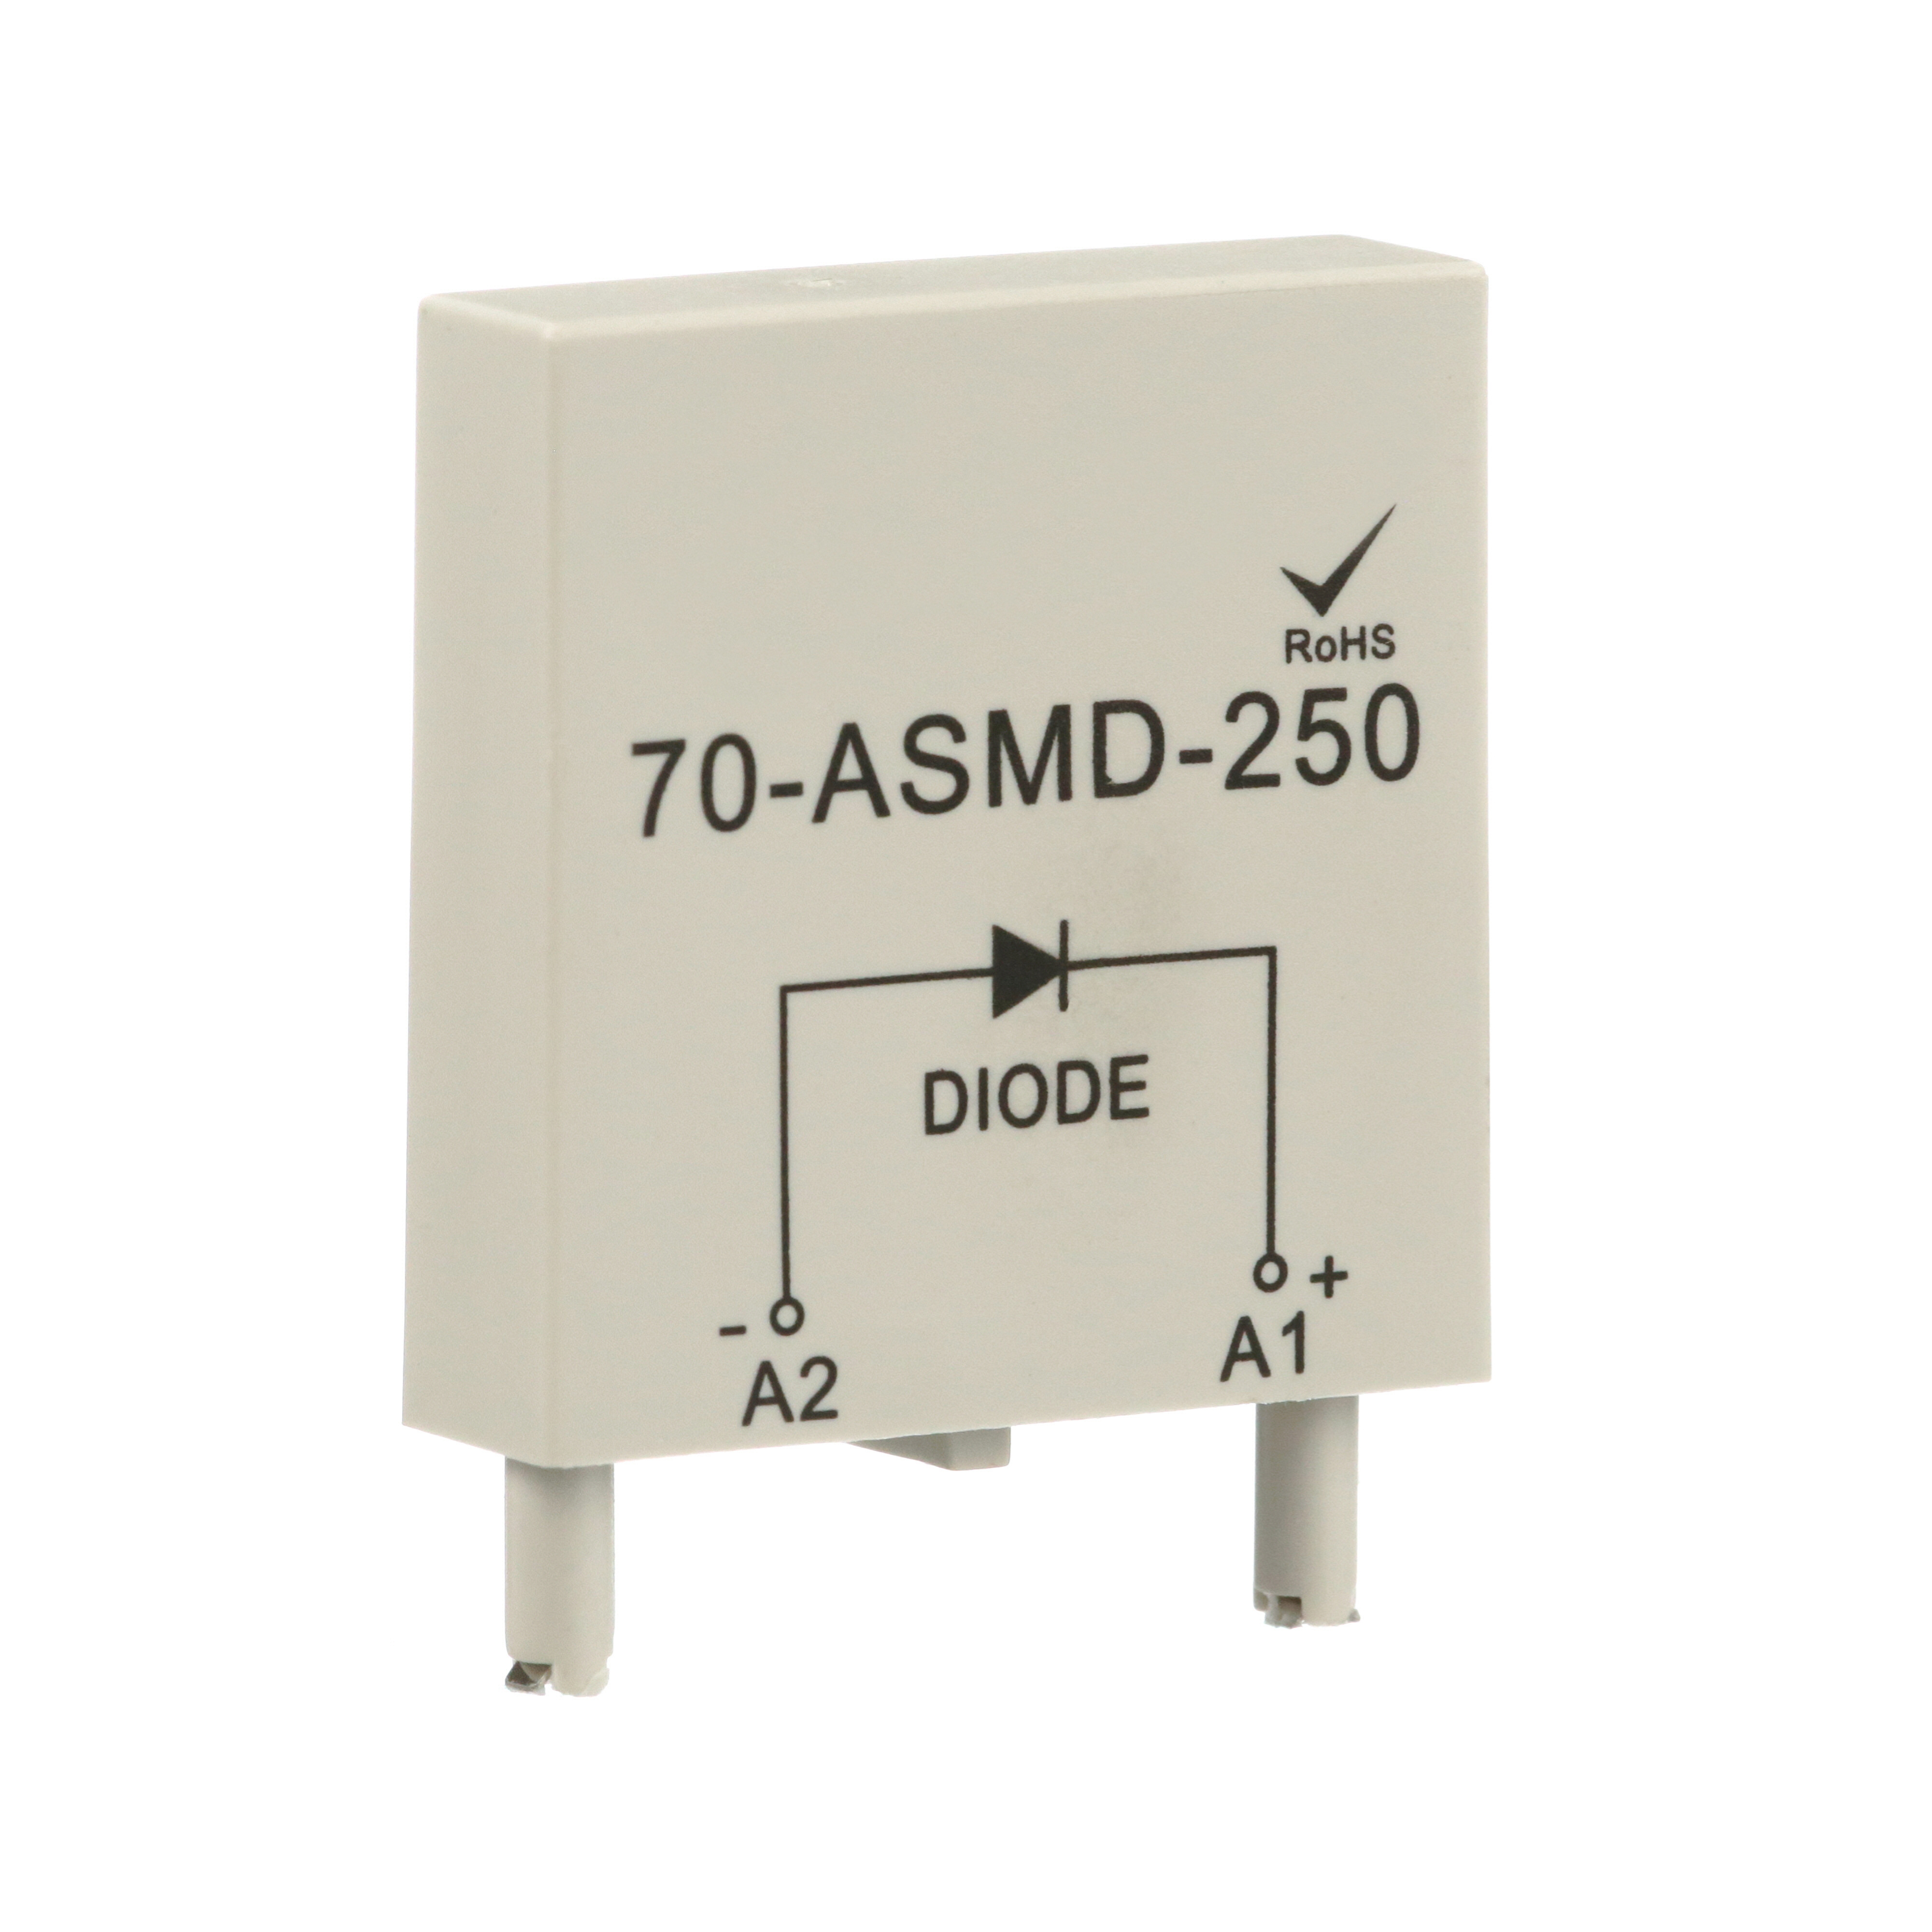 Protection module with diode, SE Relays, for 725 power relays, 6/250V DC